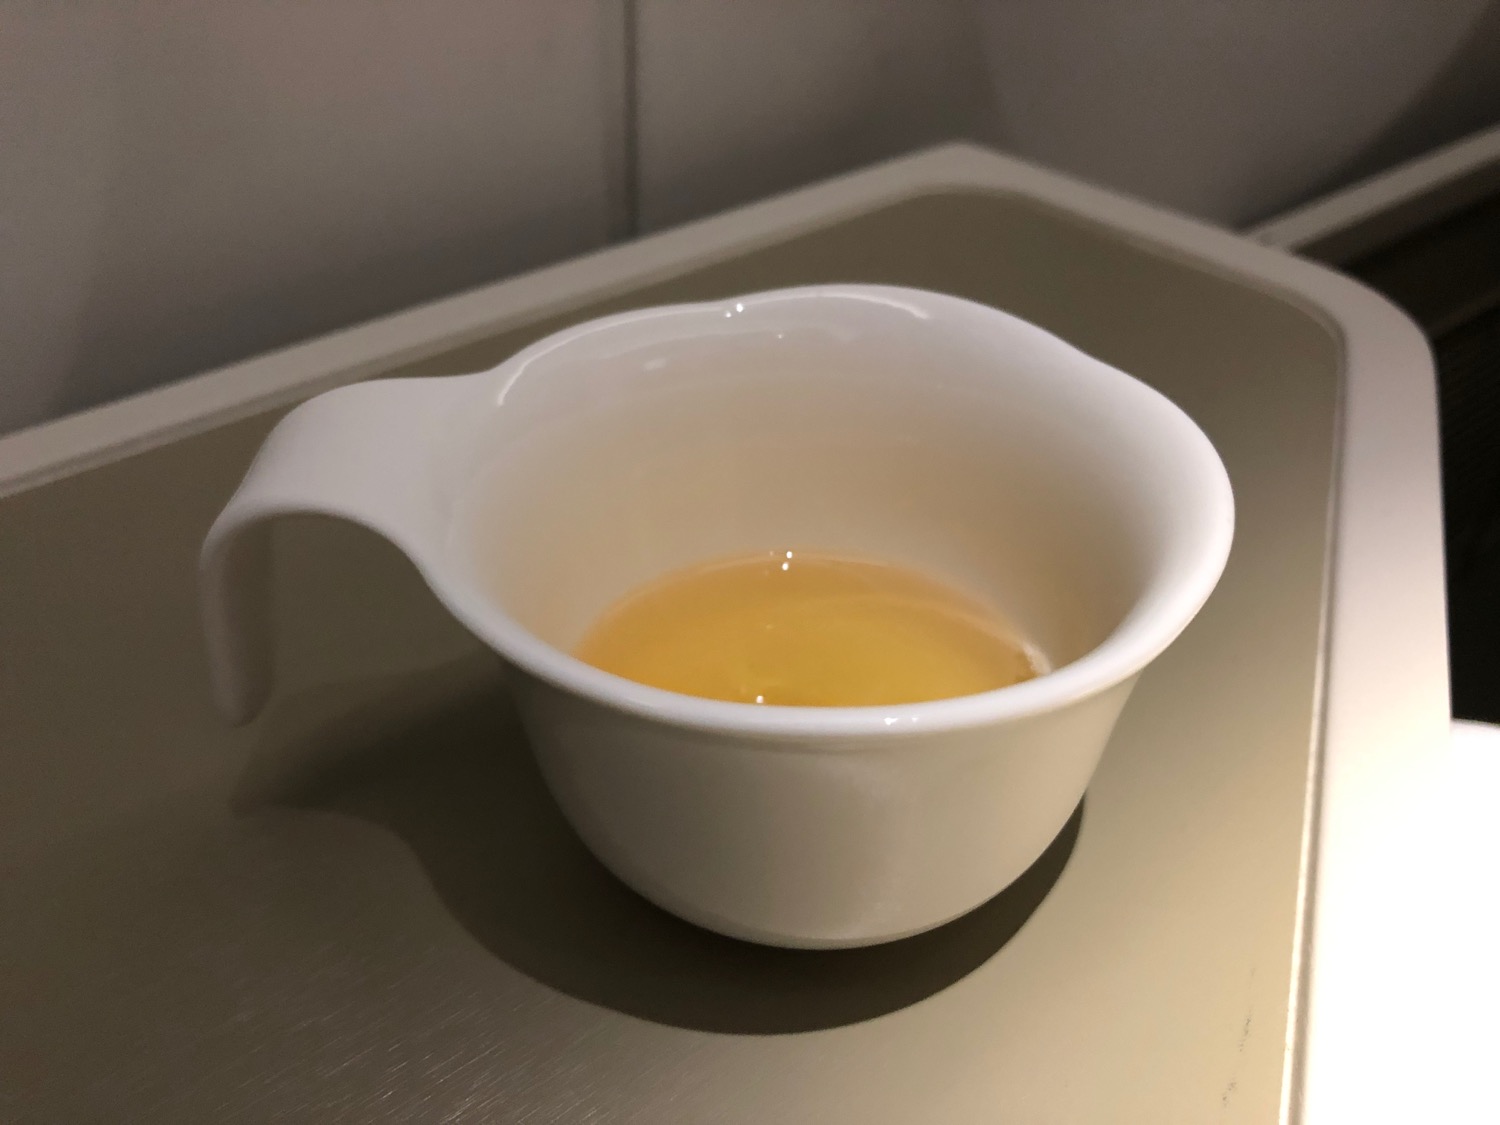 a white cup with a handle and a yellow liquid in it